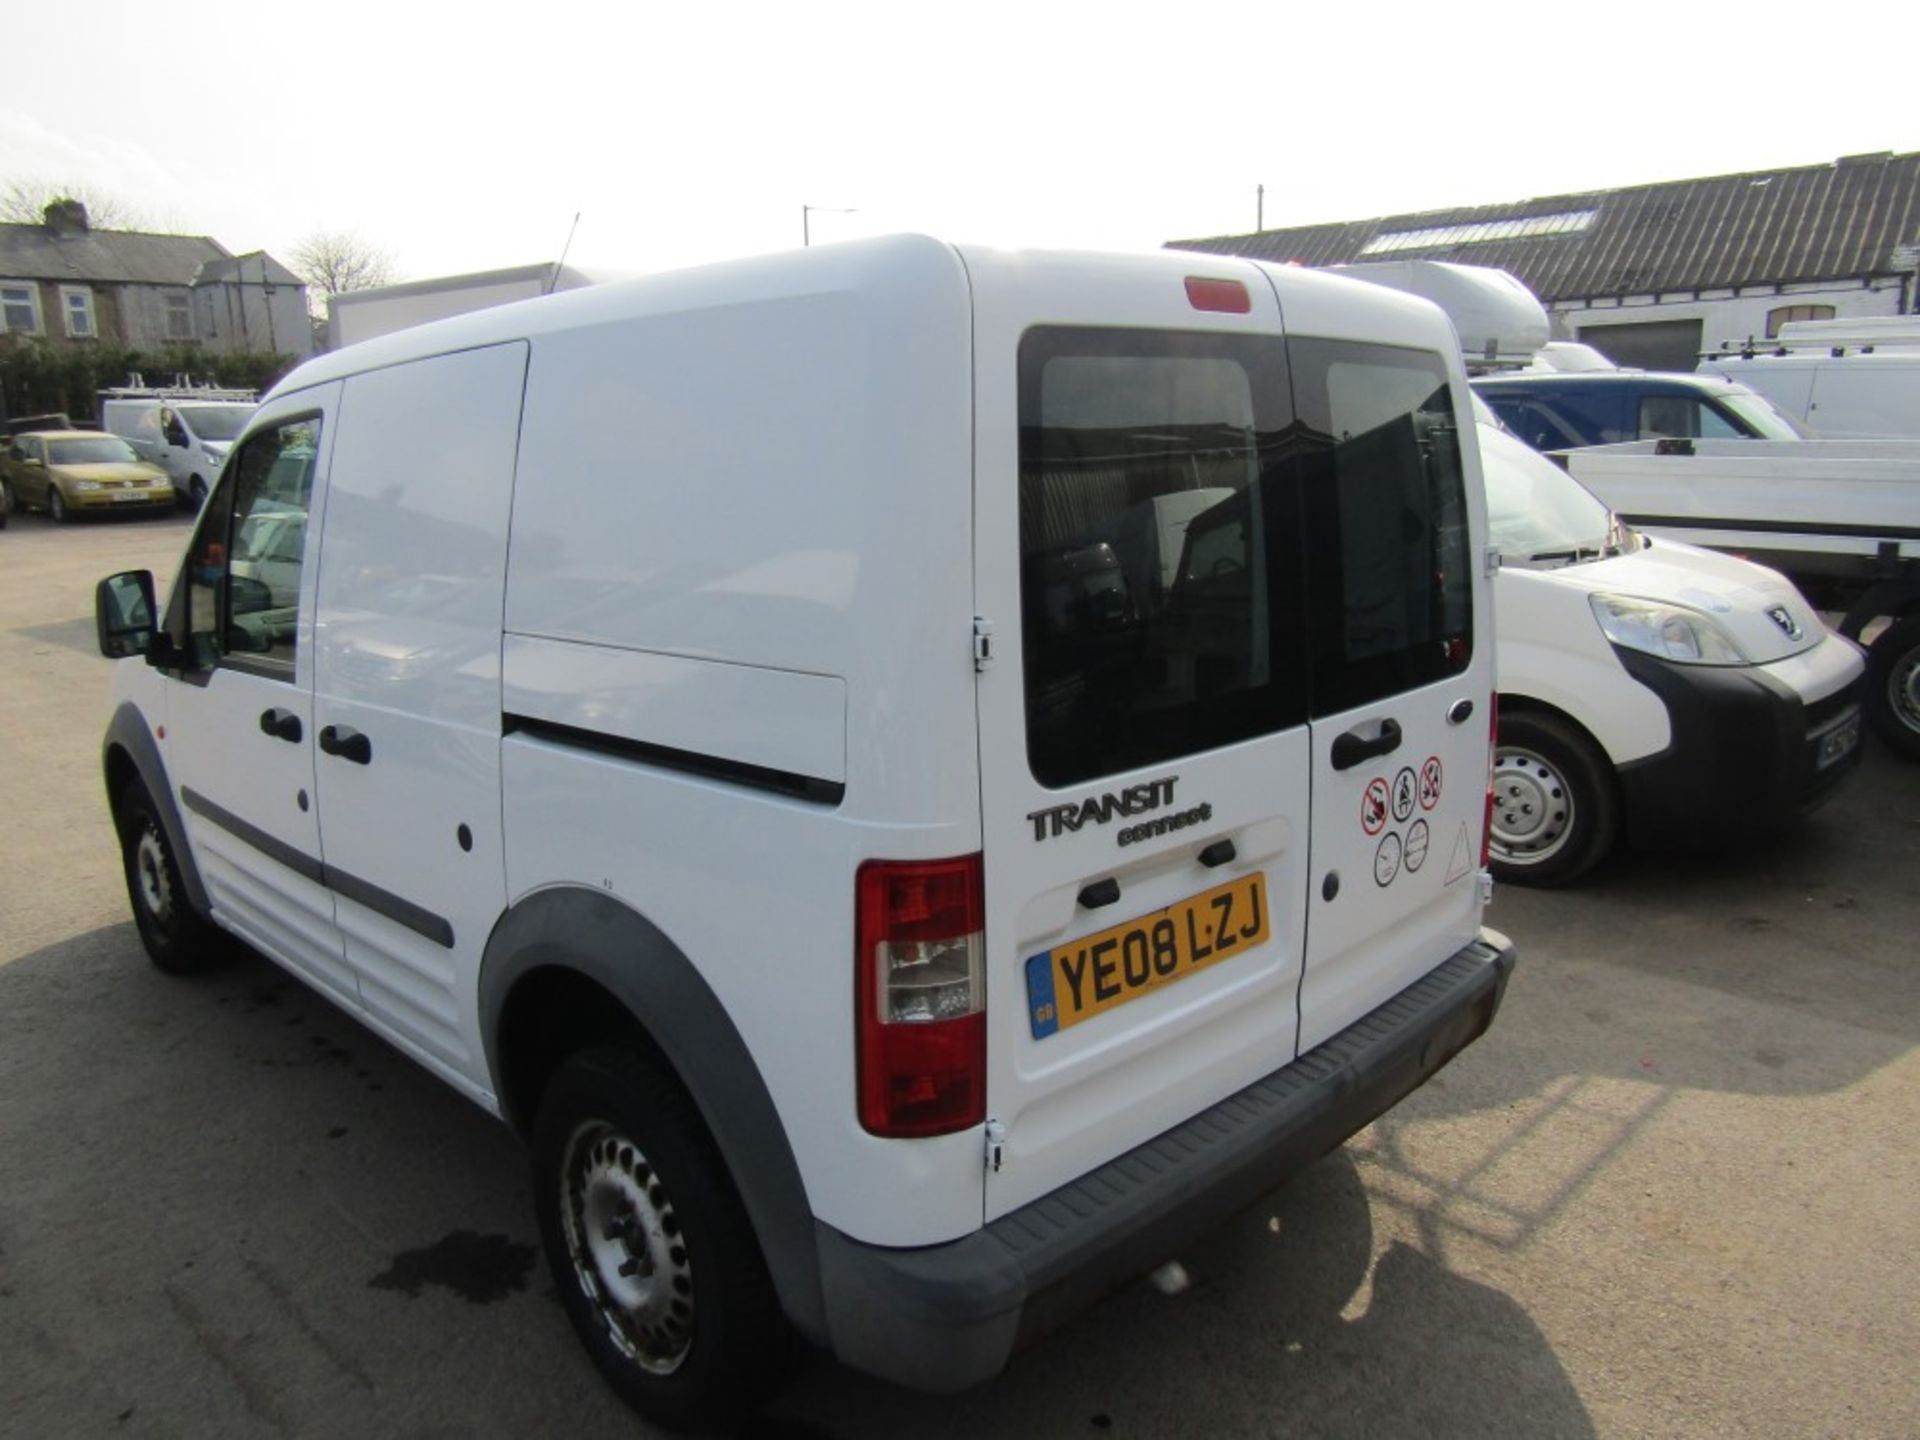 08 reg FORD TRANSIT CONNECT T210 L75 (DIRECT COUNCIL) 1ST REG 04/08, 68830M, V5 HERE, 1 OWNER FROM - Image 3 of 8